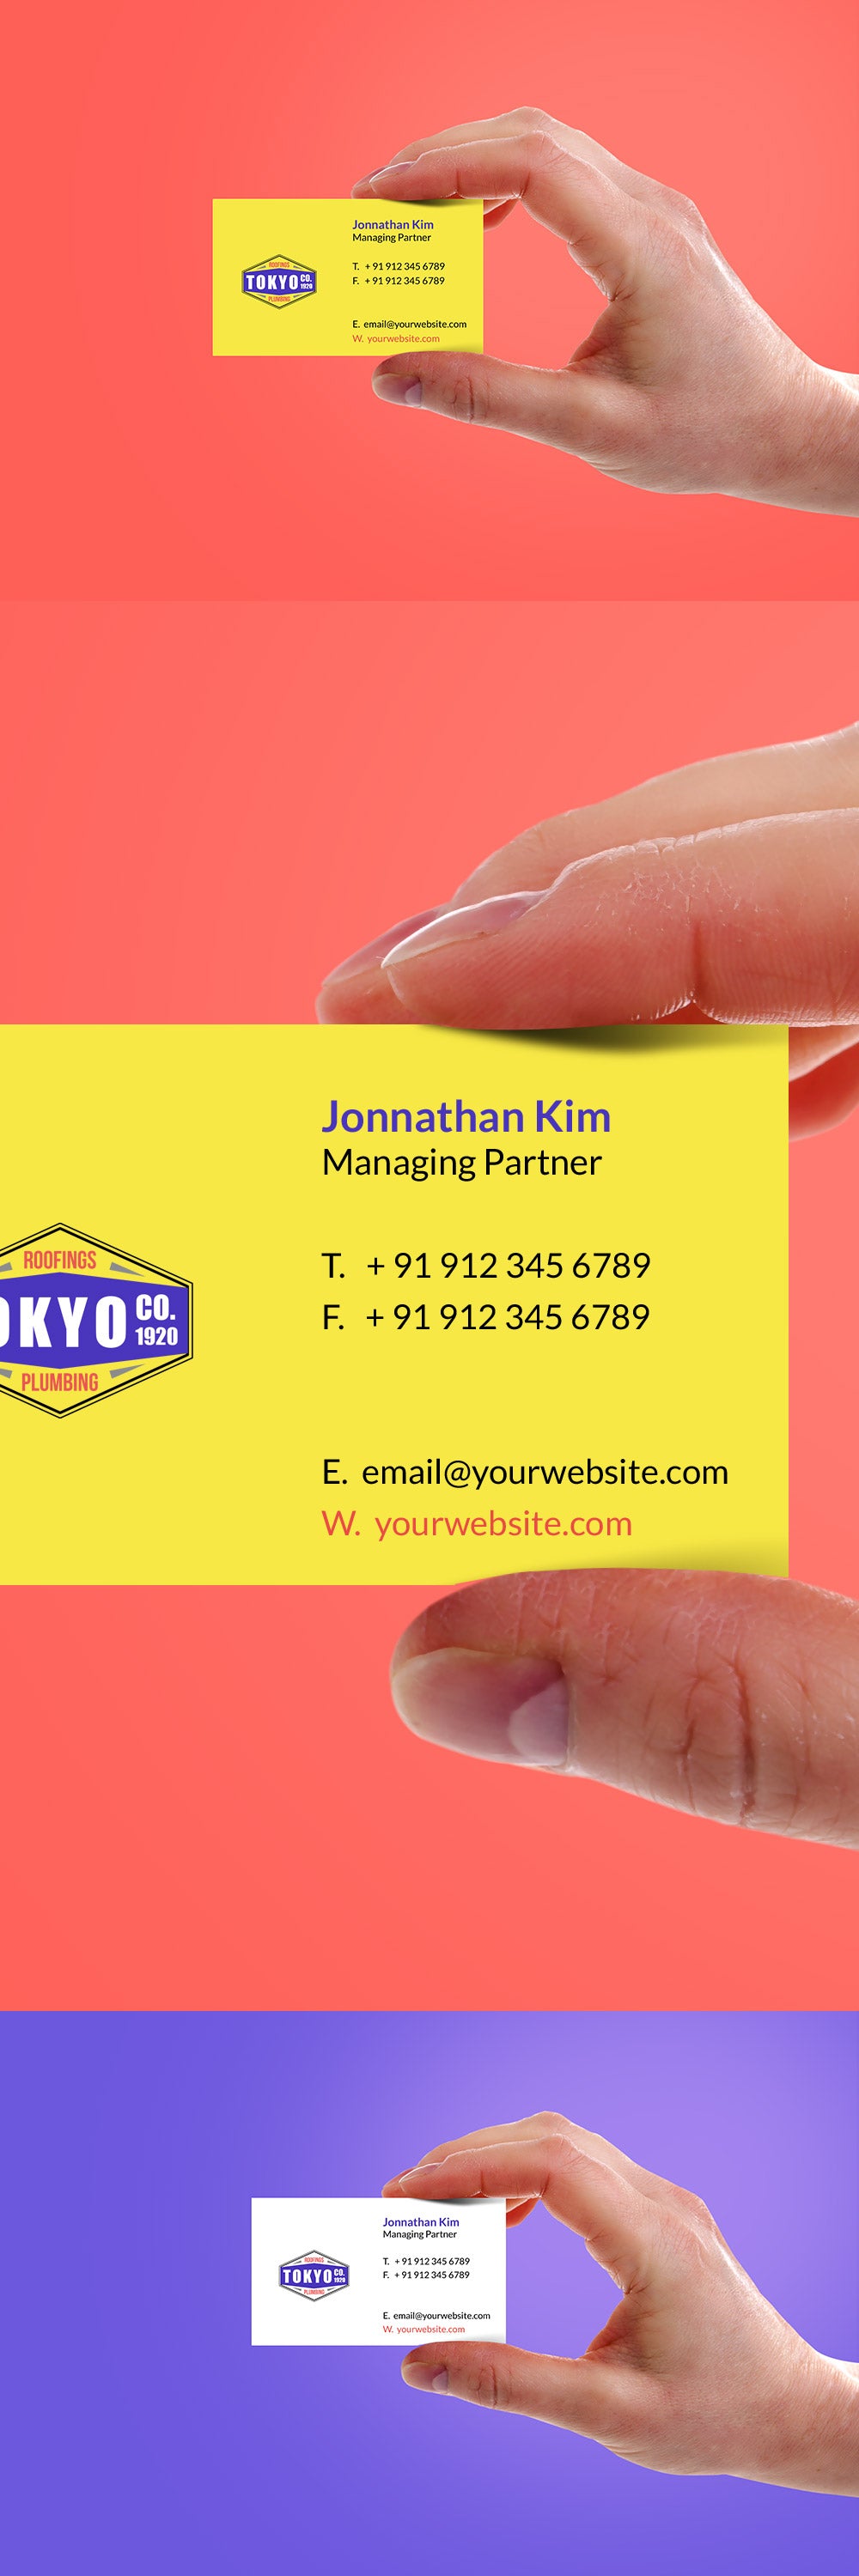 Free Hand Holding Yellow Business Card Mockup PSD